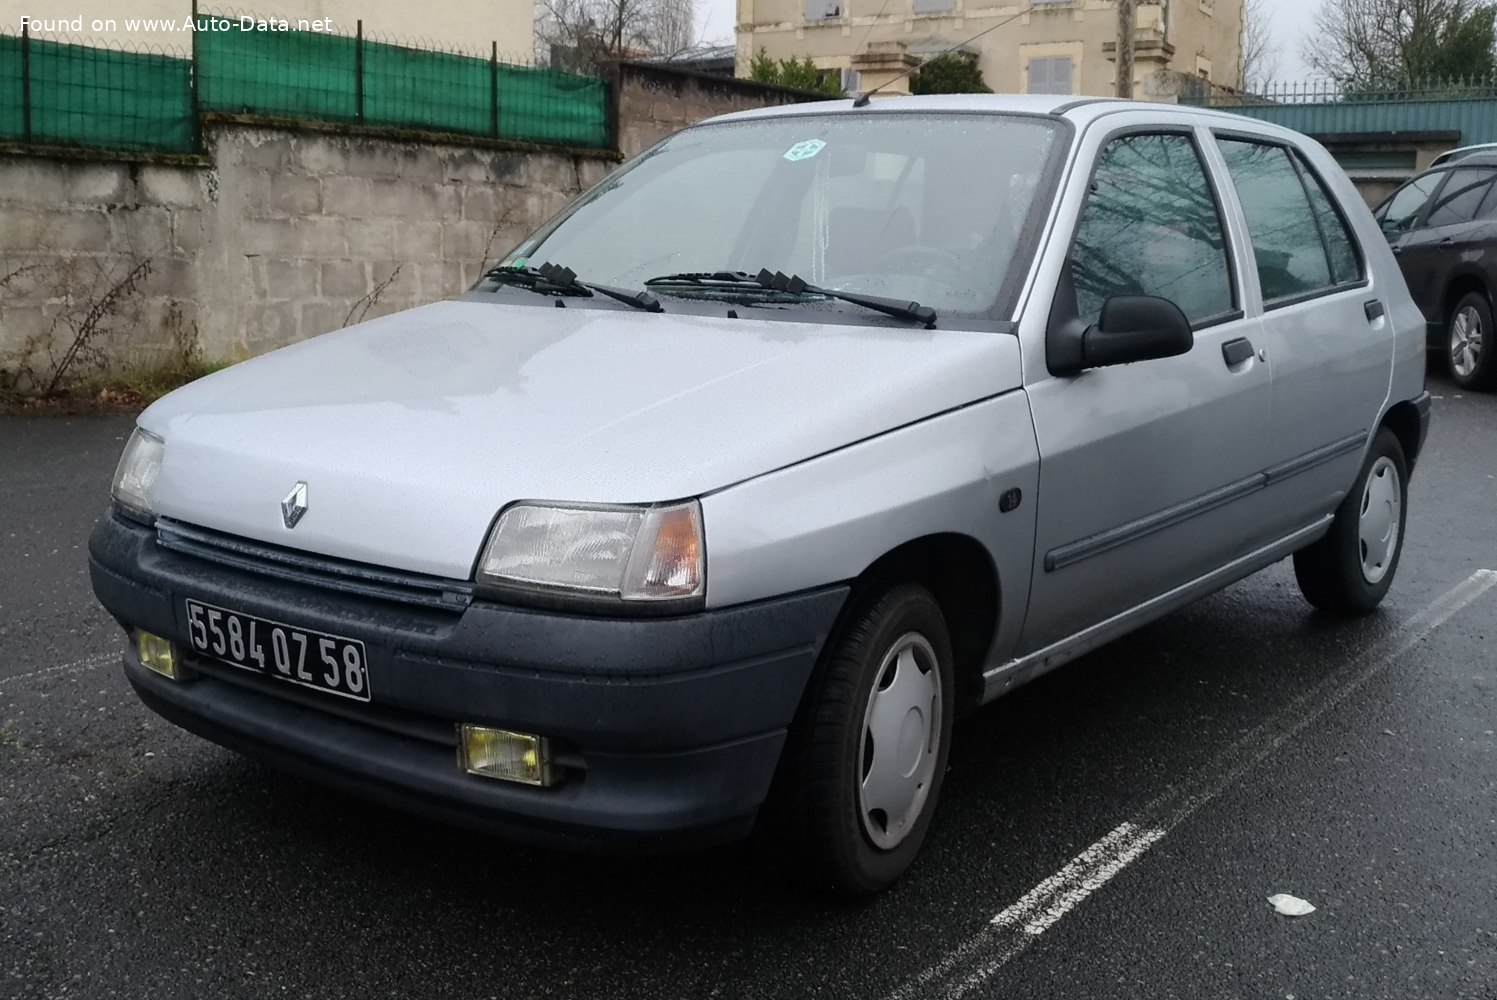 Great Barrier Reef Gedachte Bestrating 1990 Renault Clio I | Technical Specs, Fuel consumption, Dimensions